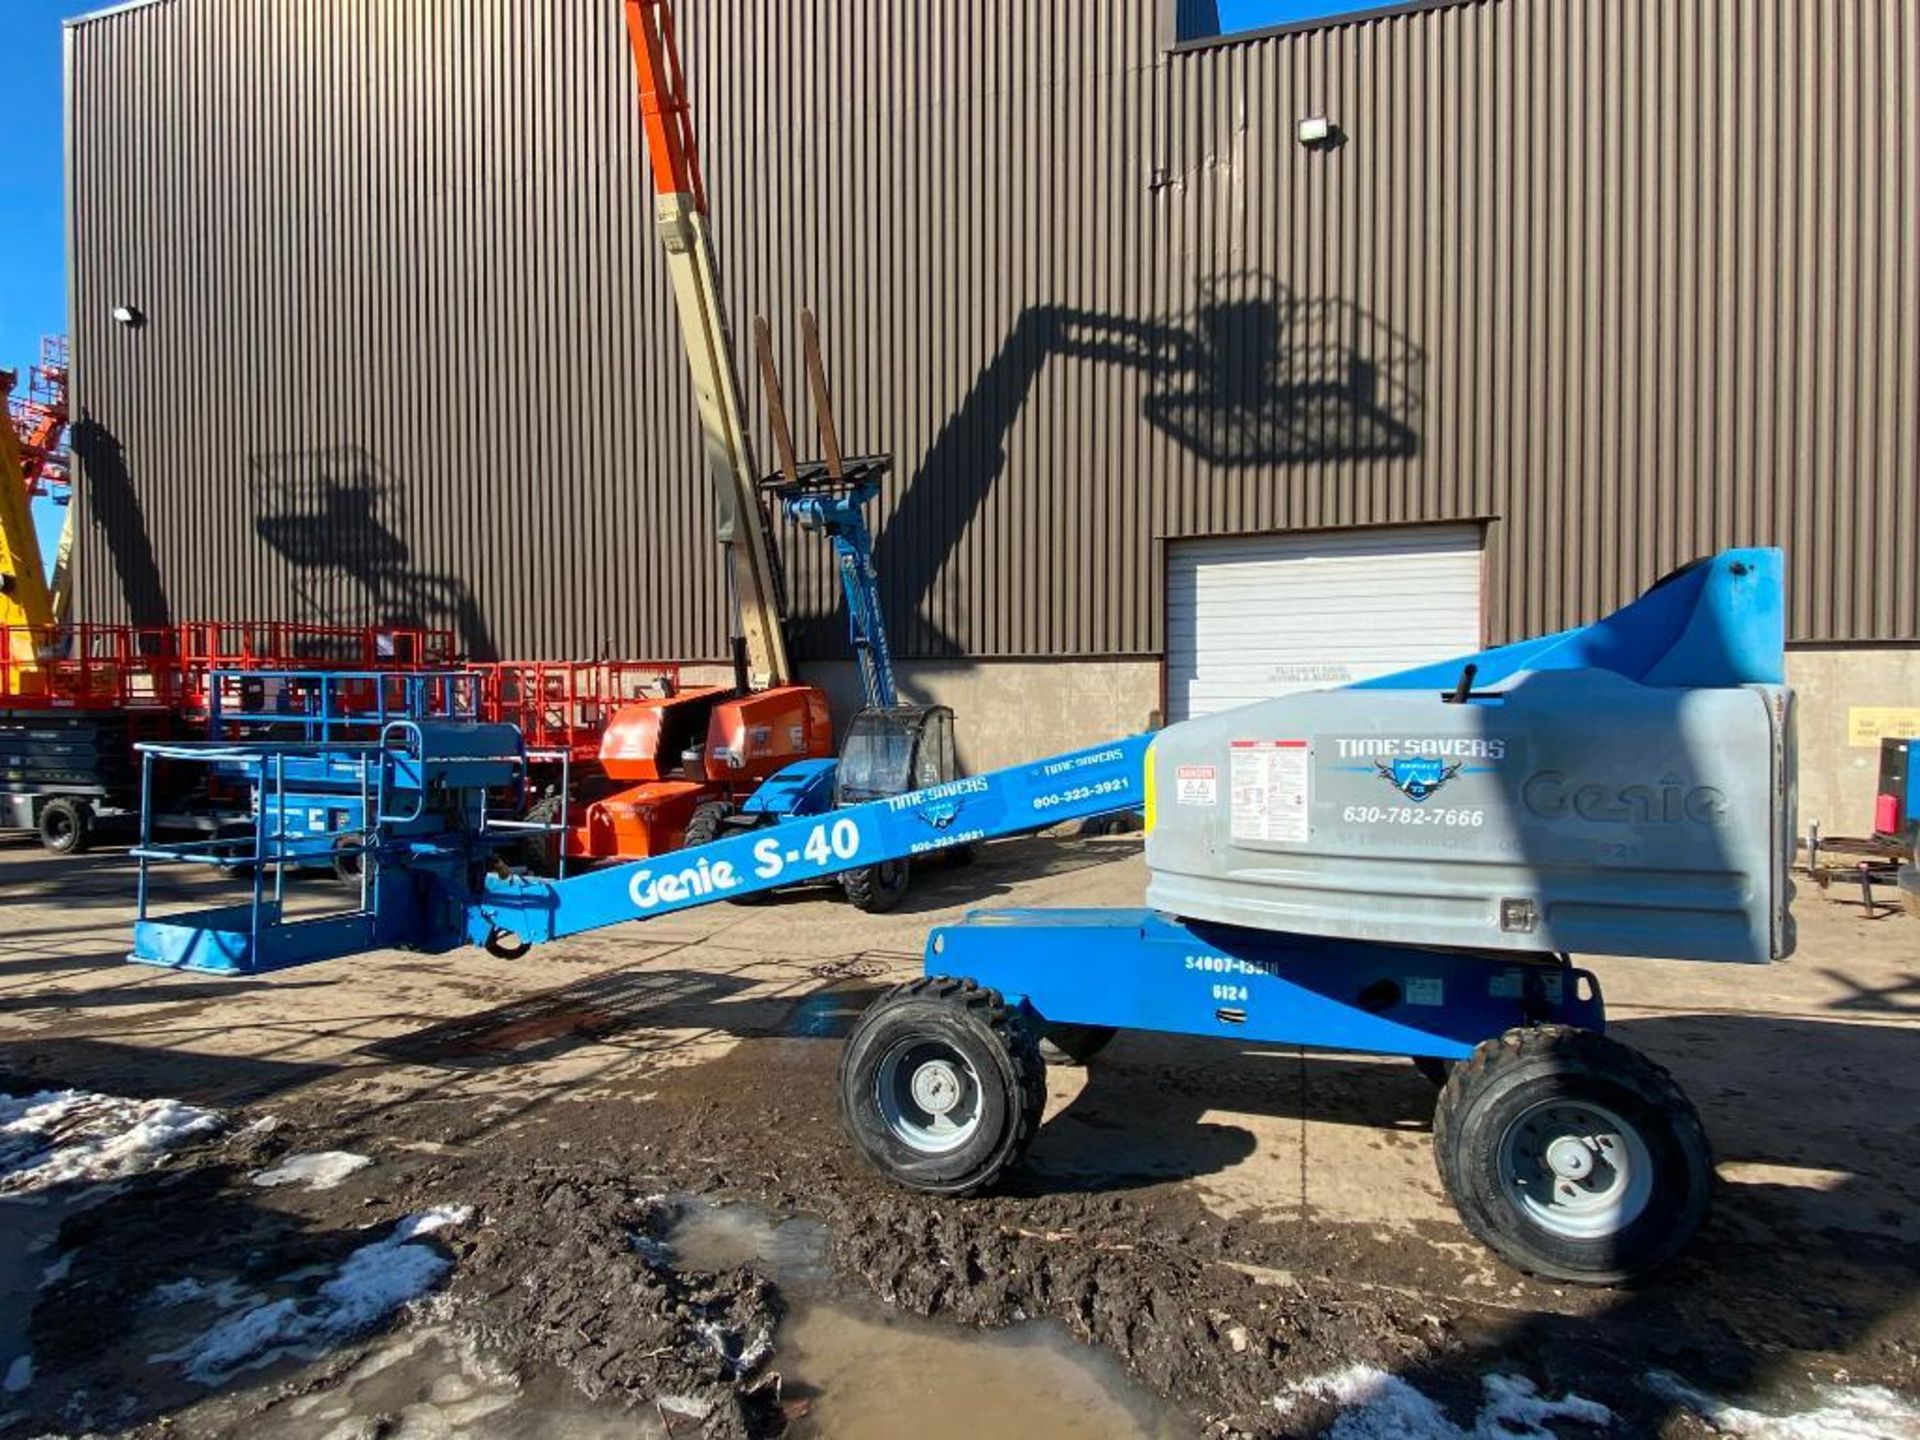 Genie S-40 Rough Terrain Boom Lift (S/N S4007-13518, Year 2007), with 40' Platform Height, 31.8' - Image 4 of 8